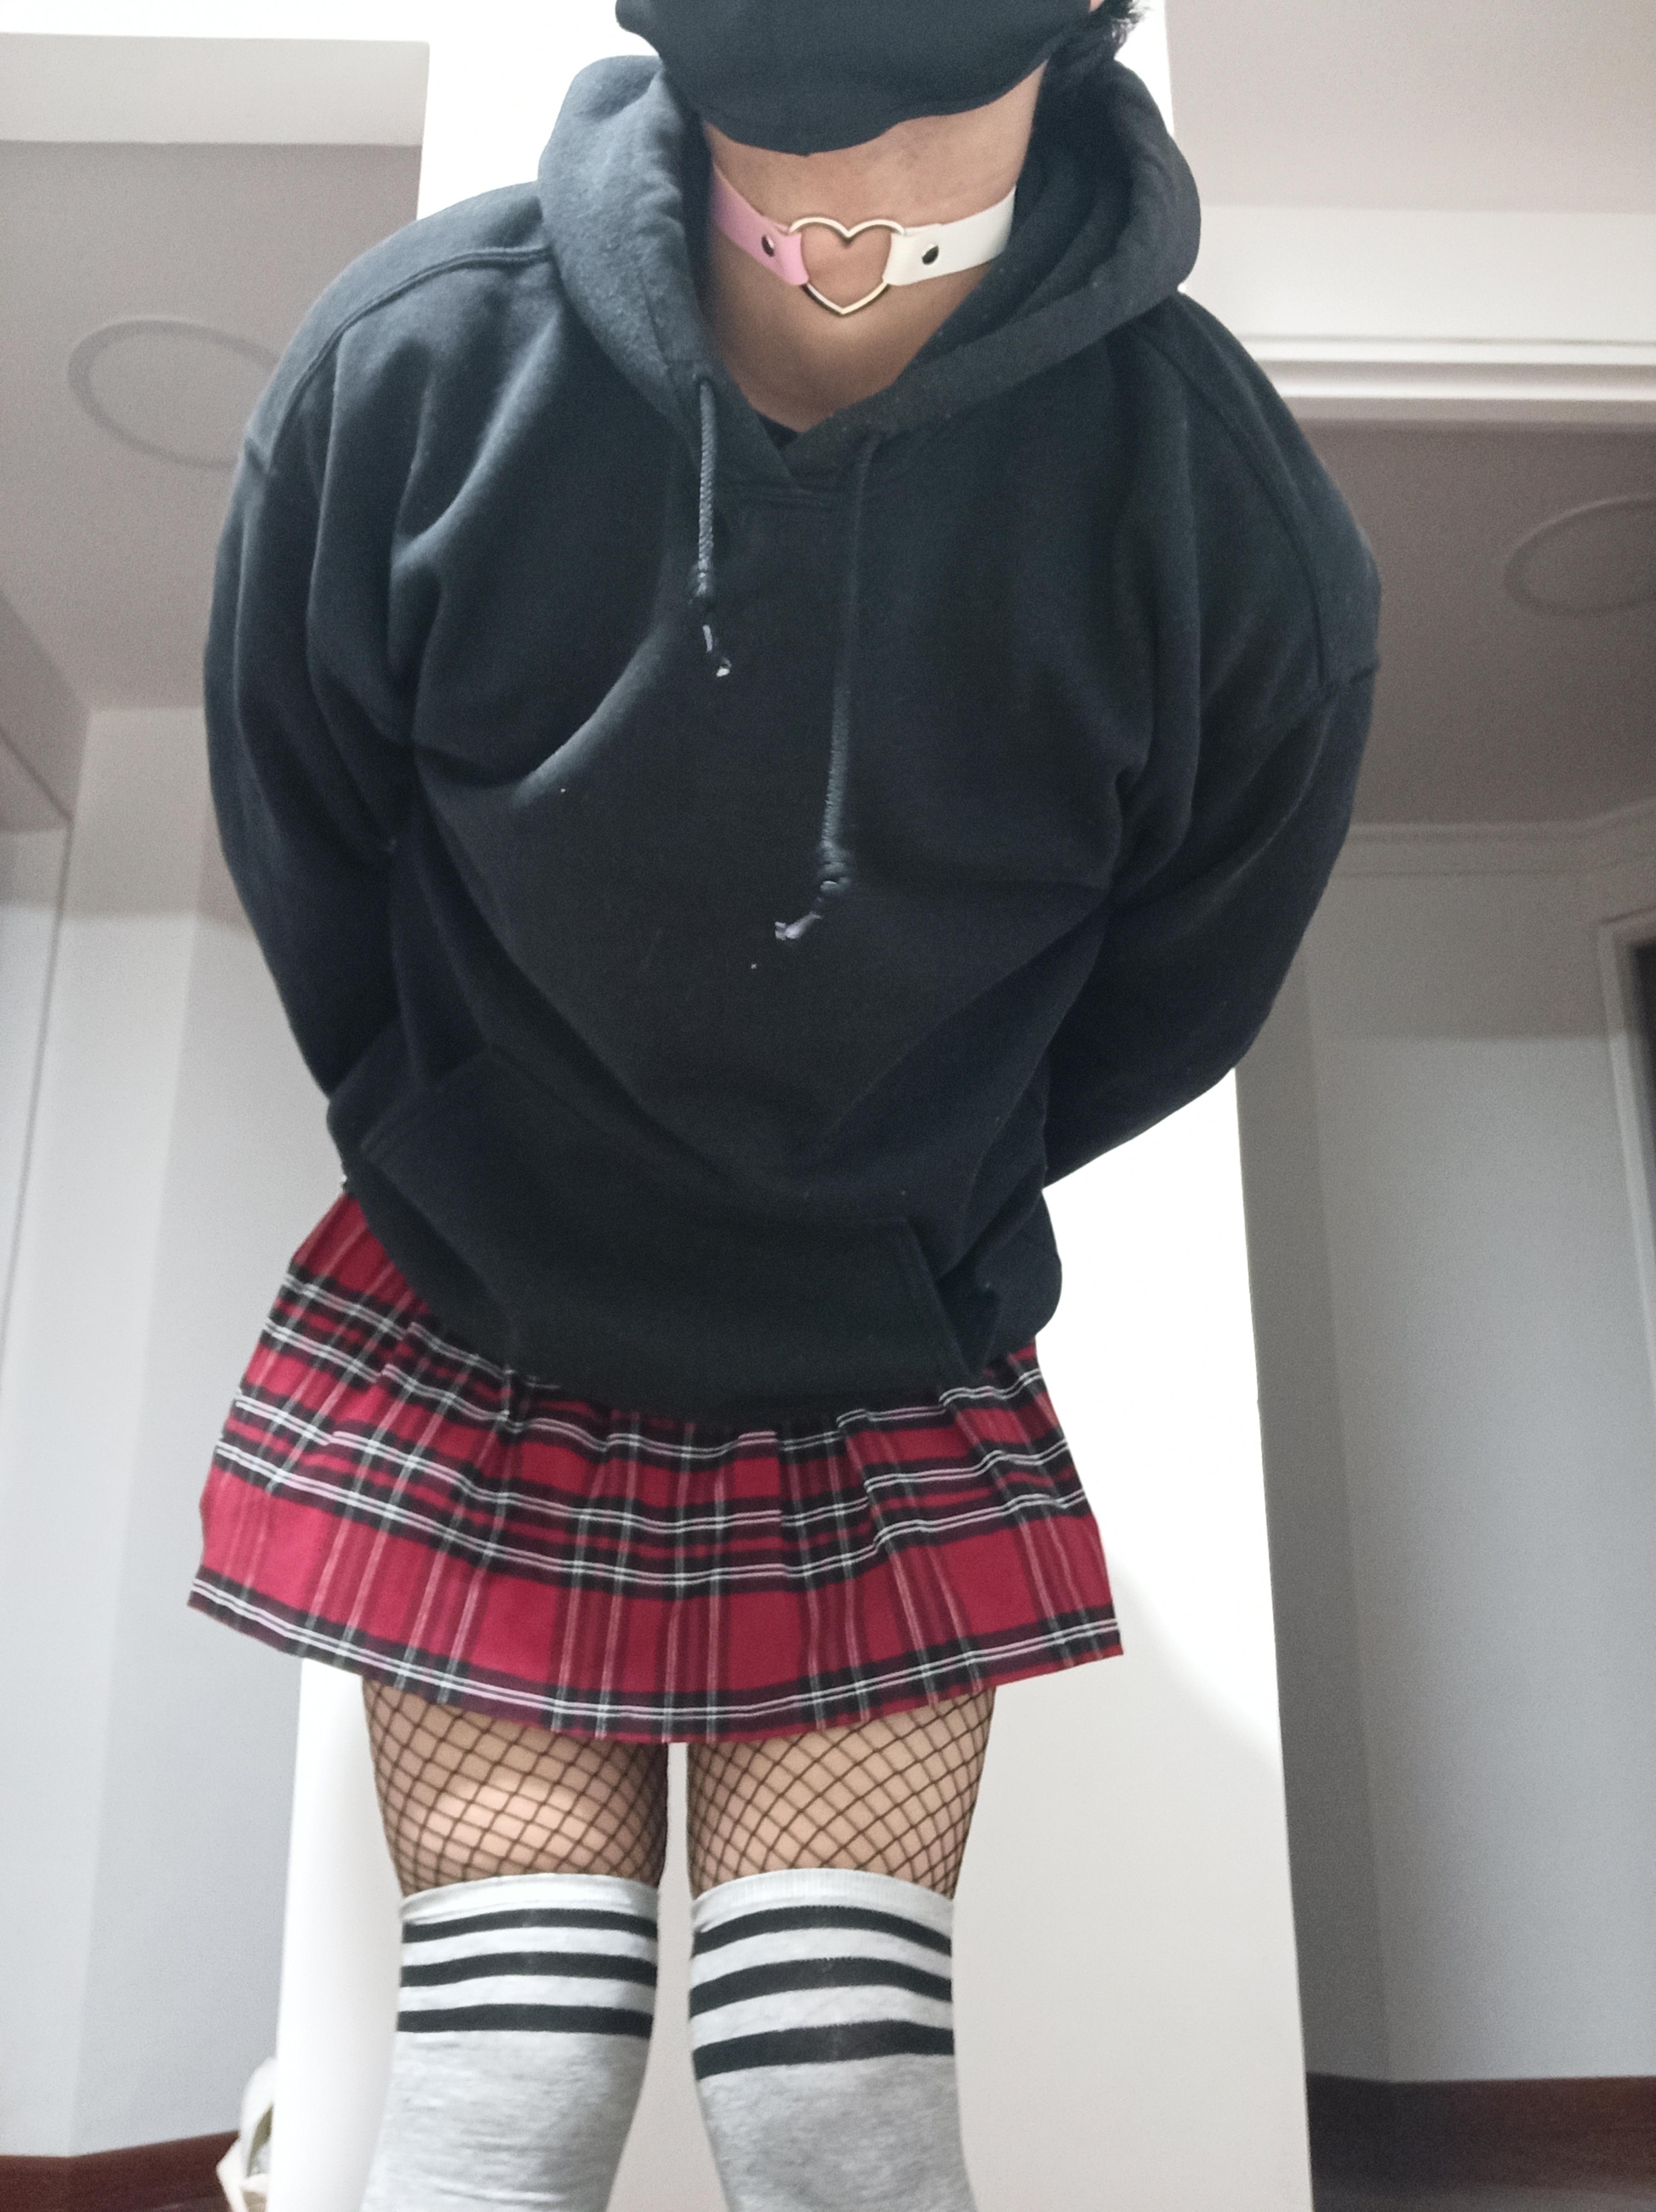 Full Femboy Outfit Is Cuuute Scrolller 7540